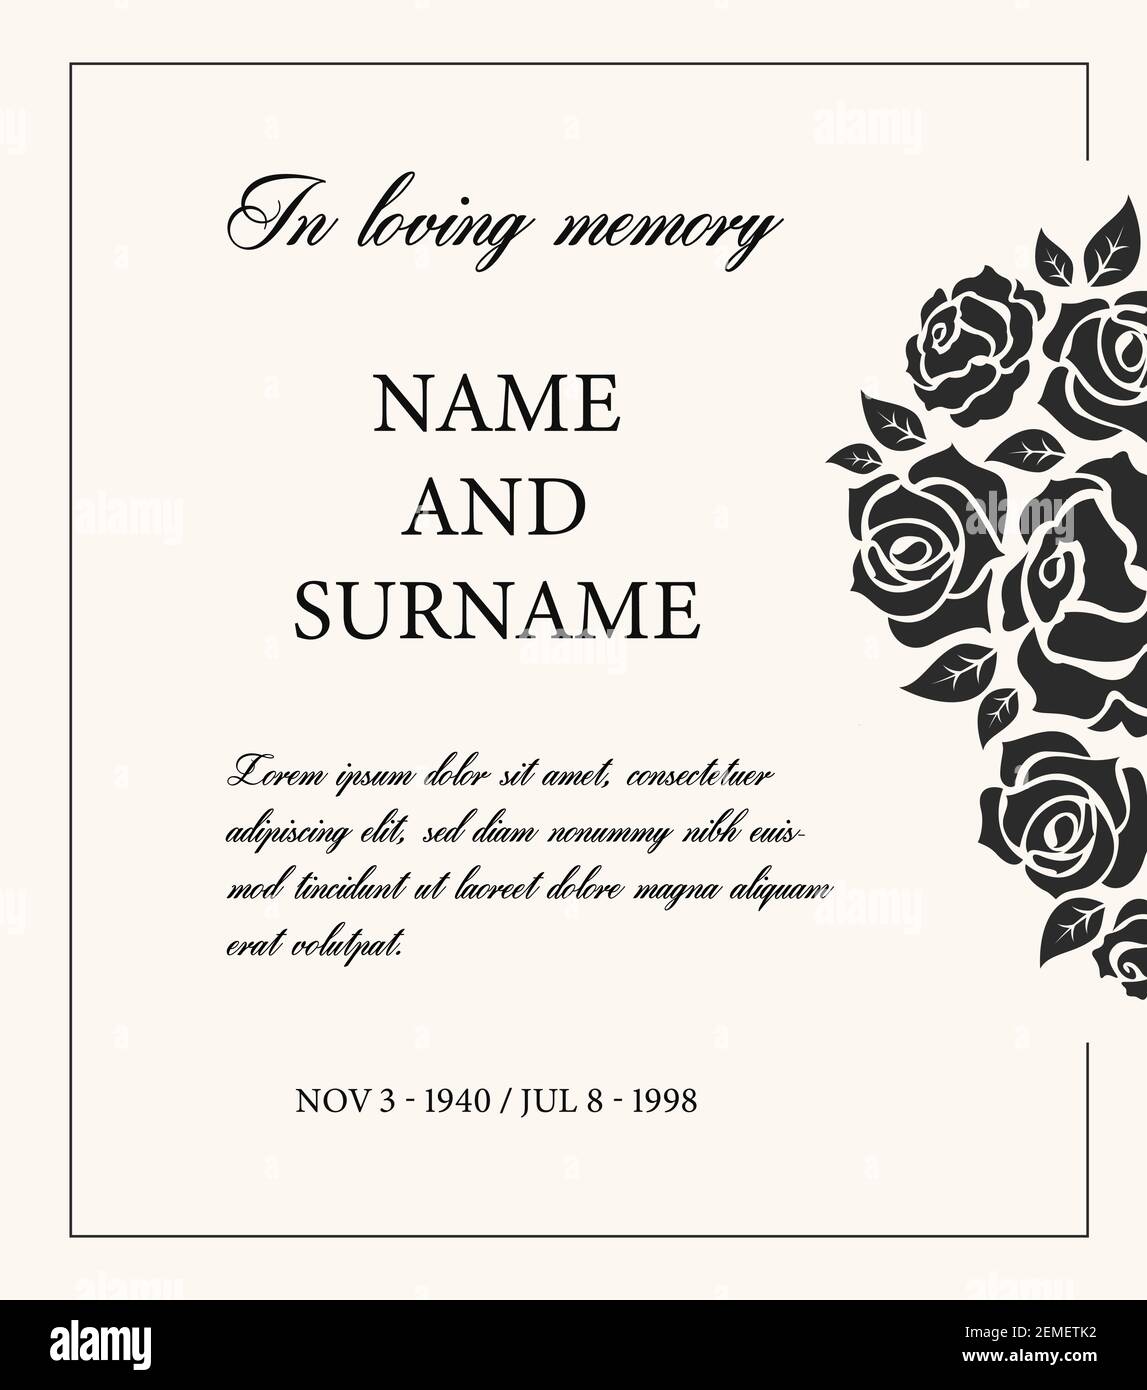 Funeral card vector template, vintage condolence obituary with Throughout In Memory Cards Templates